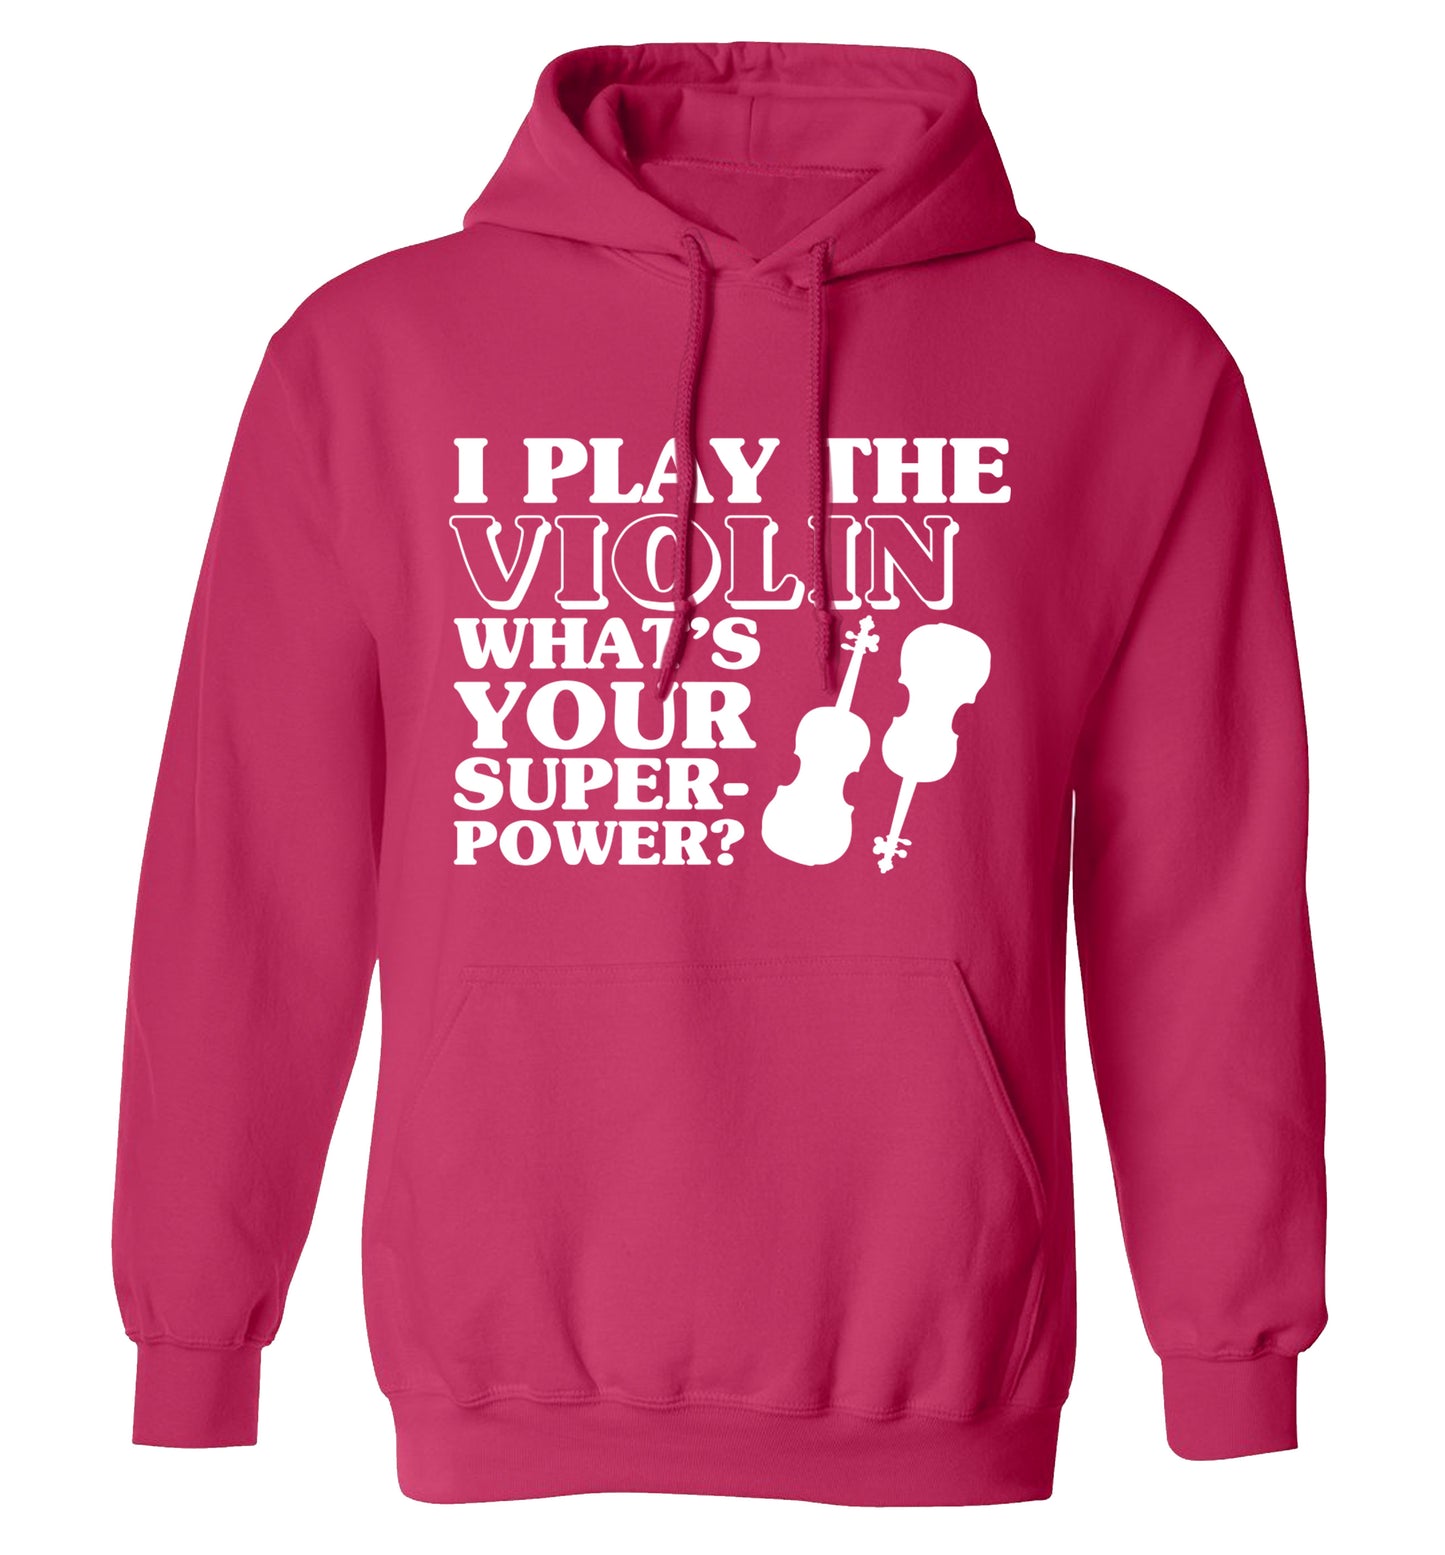 I Play Violin What's Your Superpower? adults unisex pink hoodie 2XL